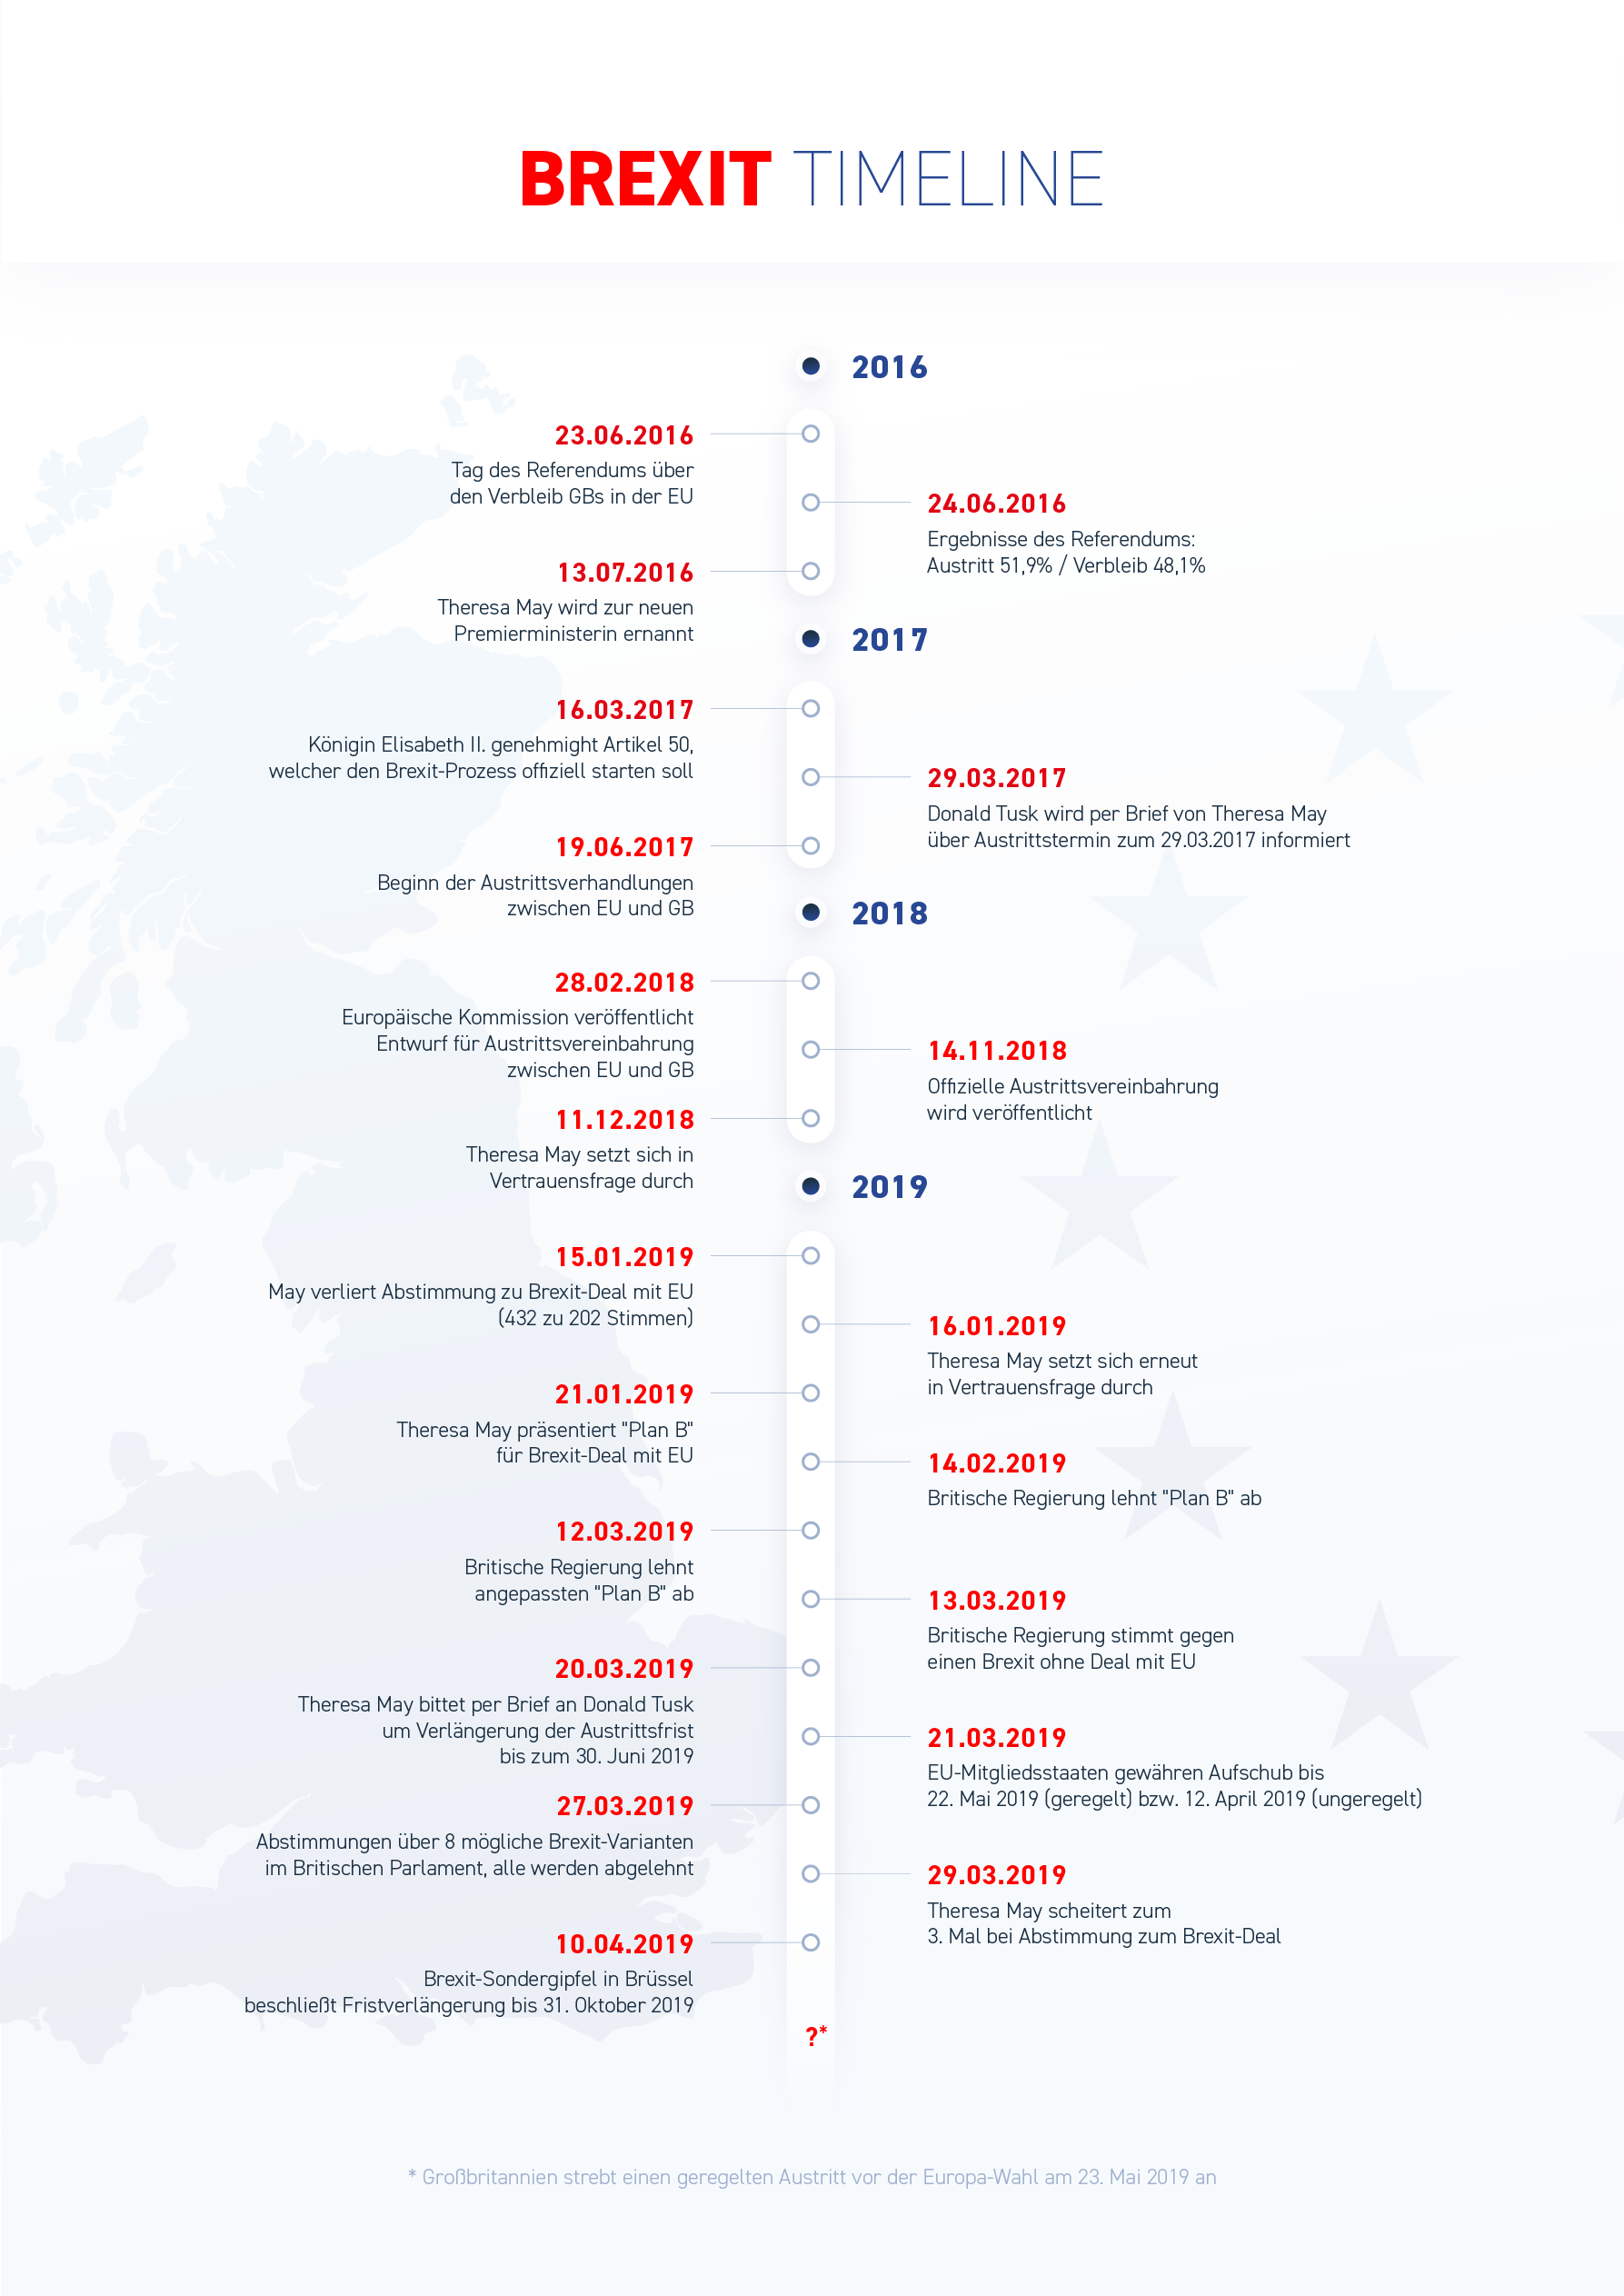 Brexit Timeline_infographic@3x